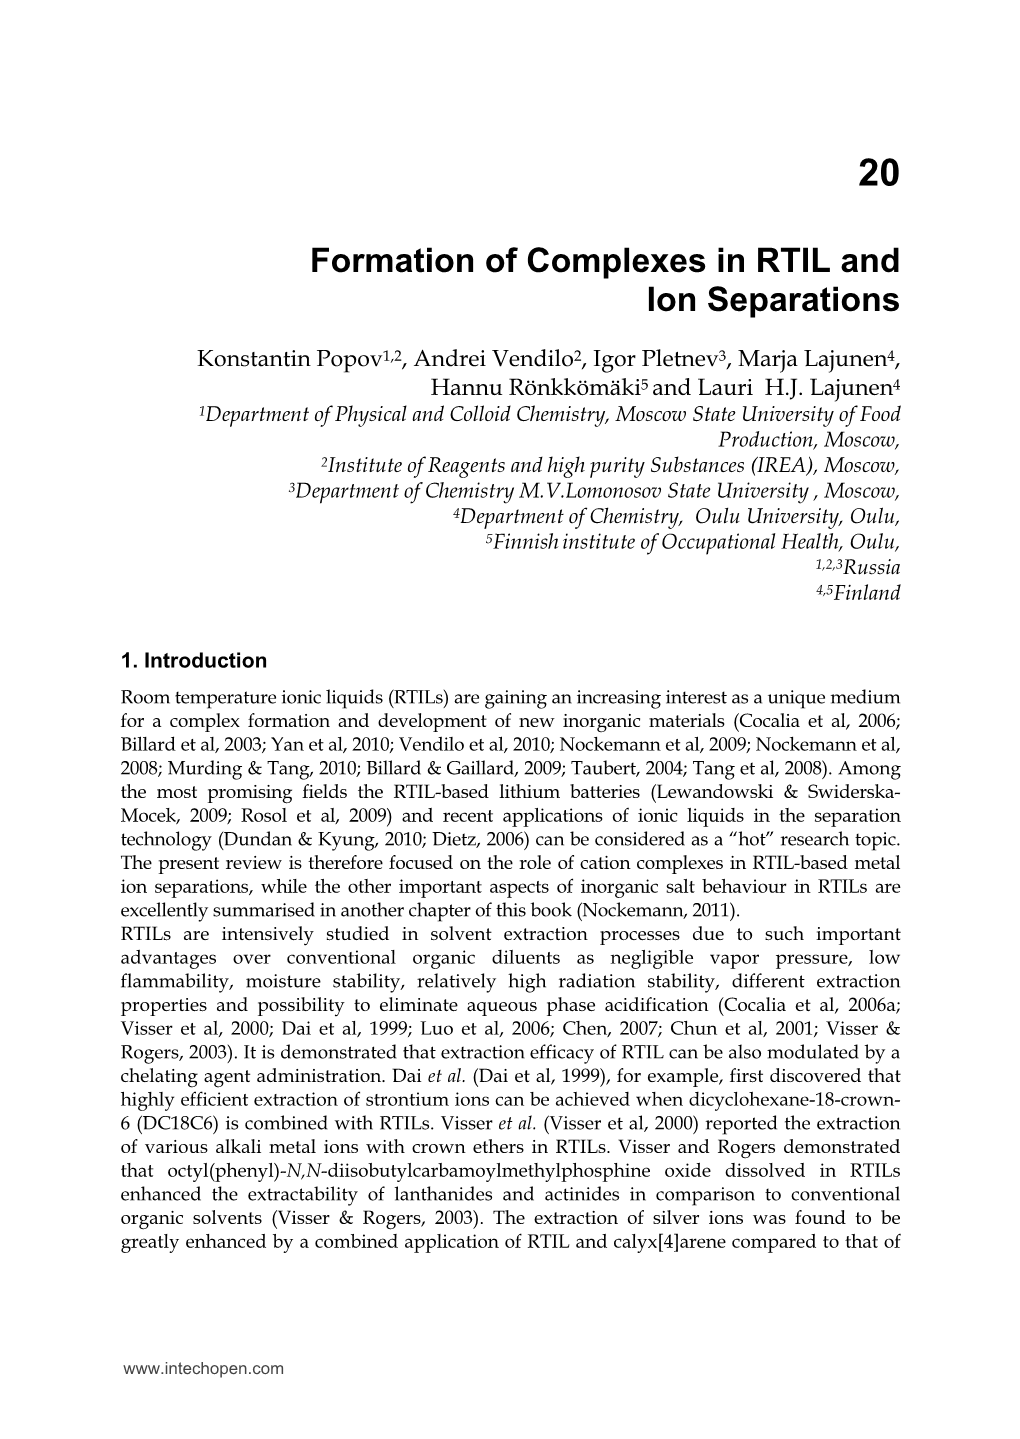 Formation of Complexes in RTIL and Ion Separations